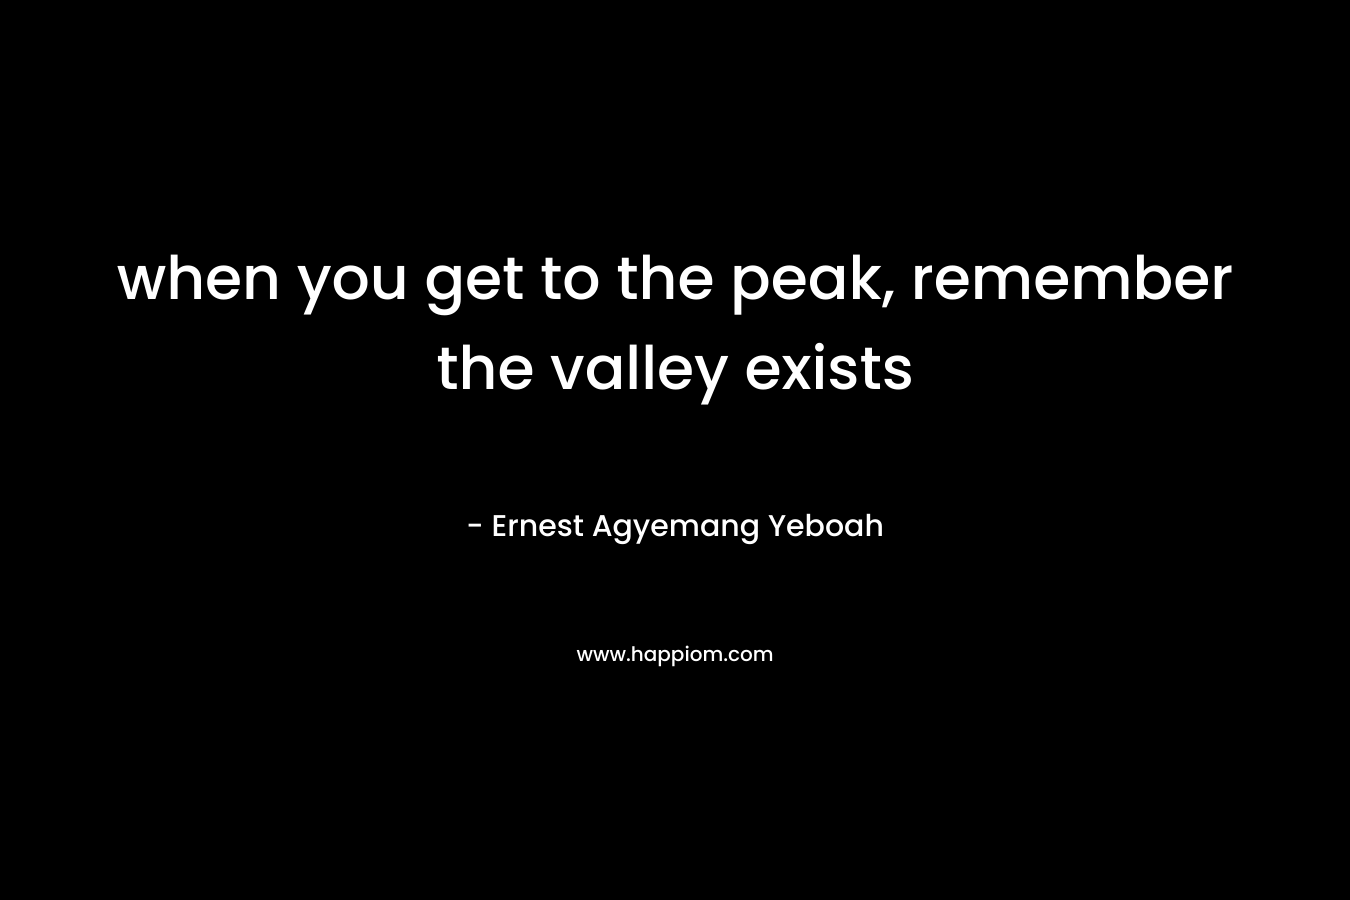 when you get to the peak, remember the valley exists – Ernest Agyemang Yeboah